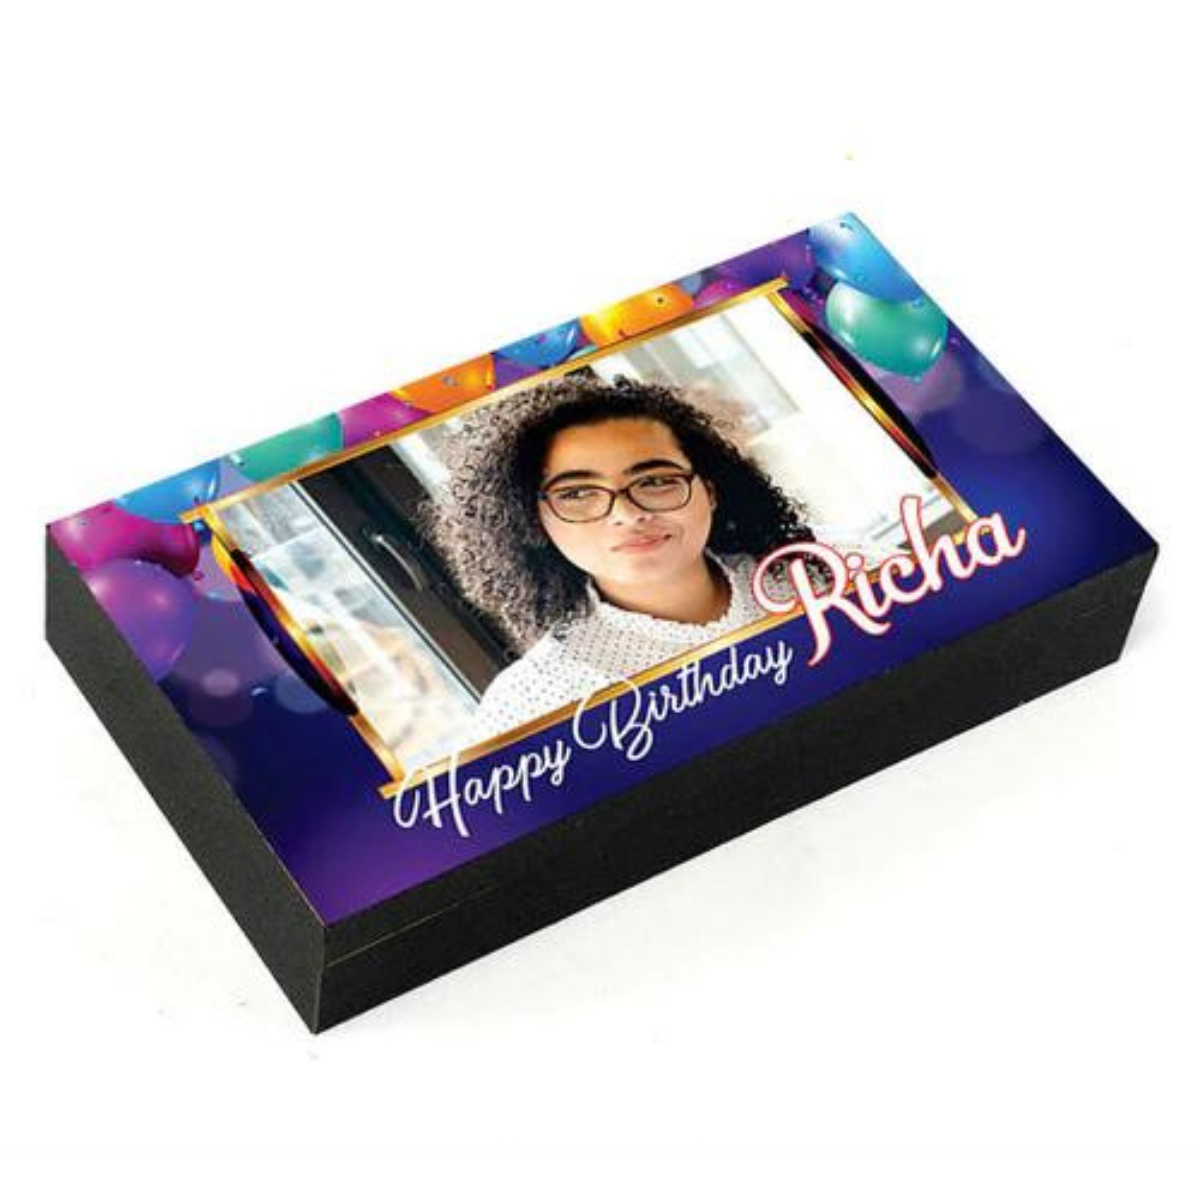 Customized Chocolates Box with Printed Name and Personalised Photo Chocolate